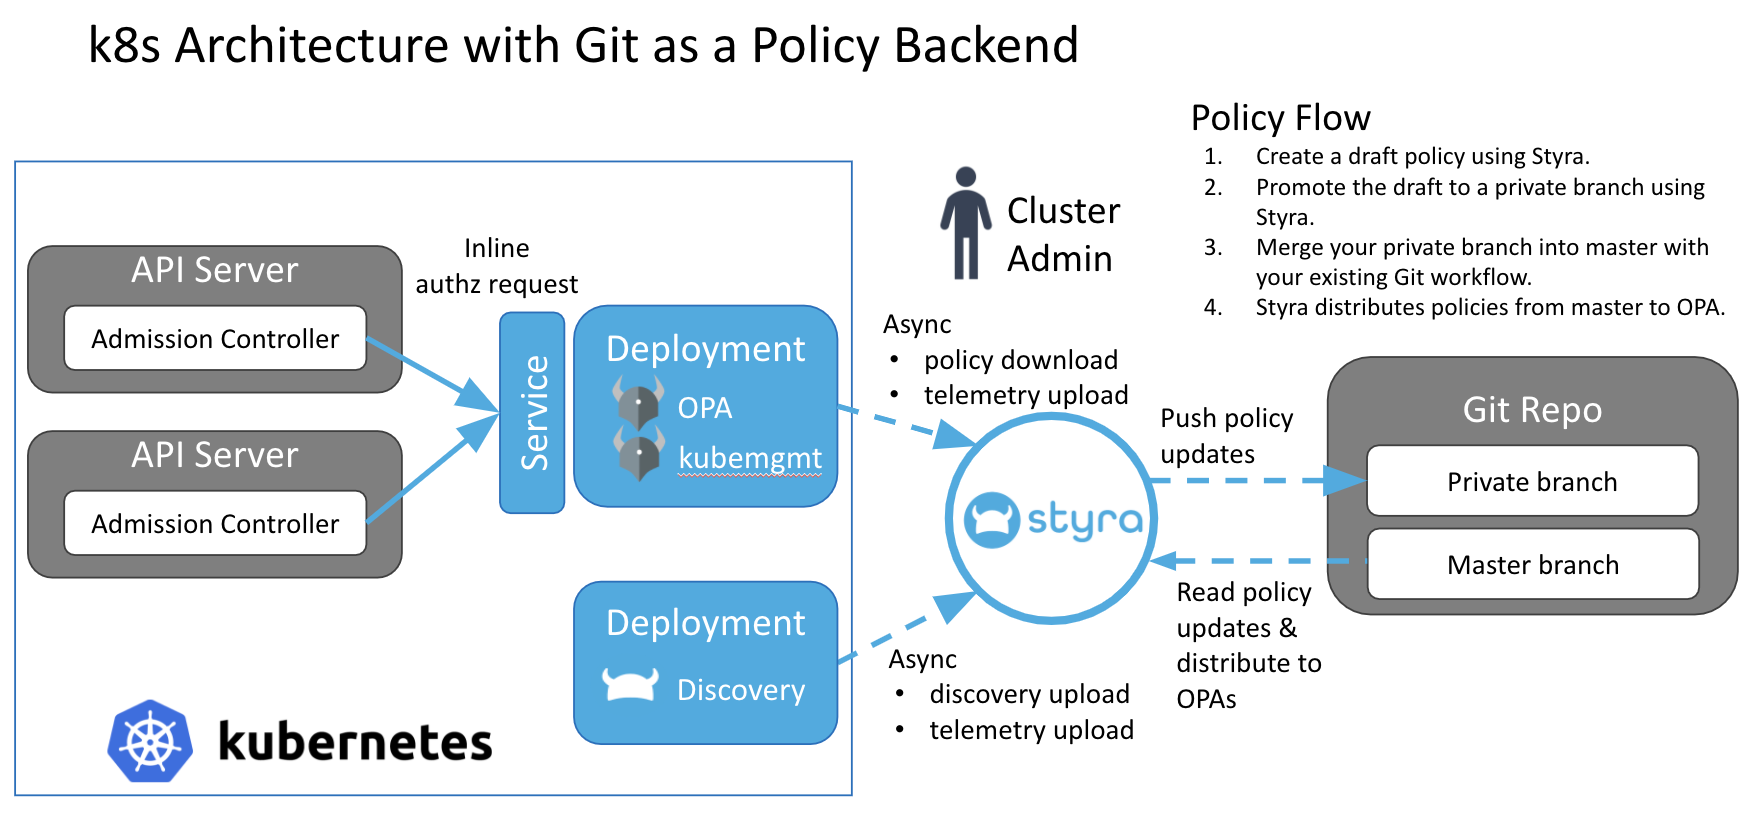 Figure 1 - Architecture with Git as a Policy Backend